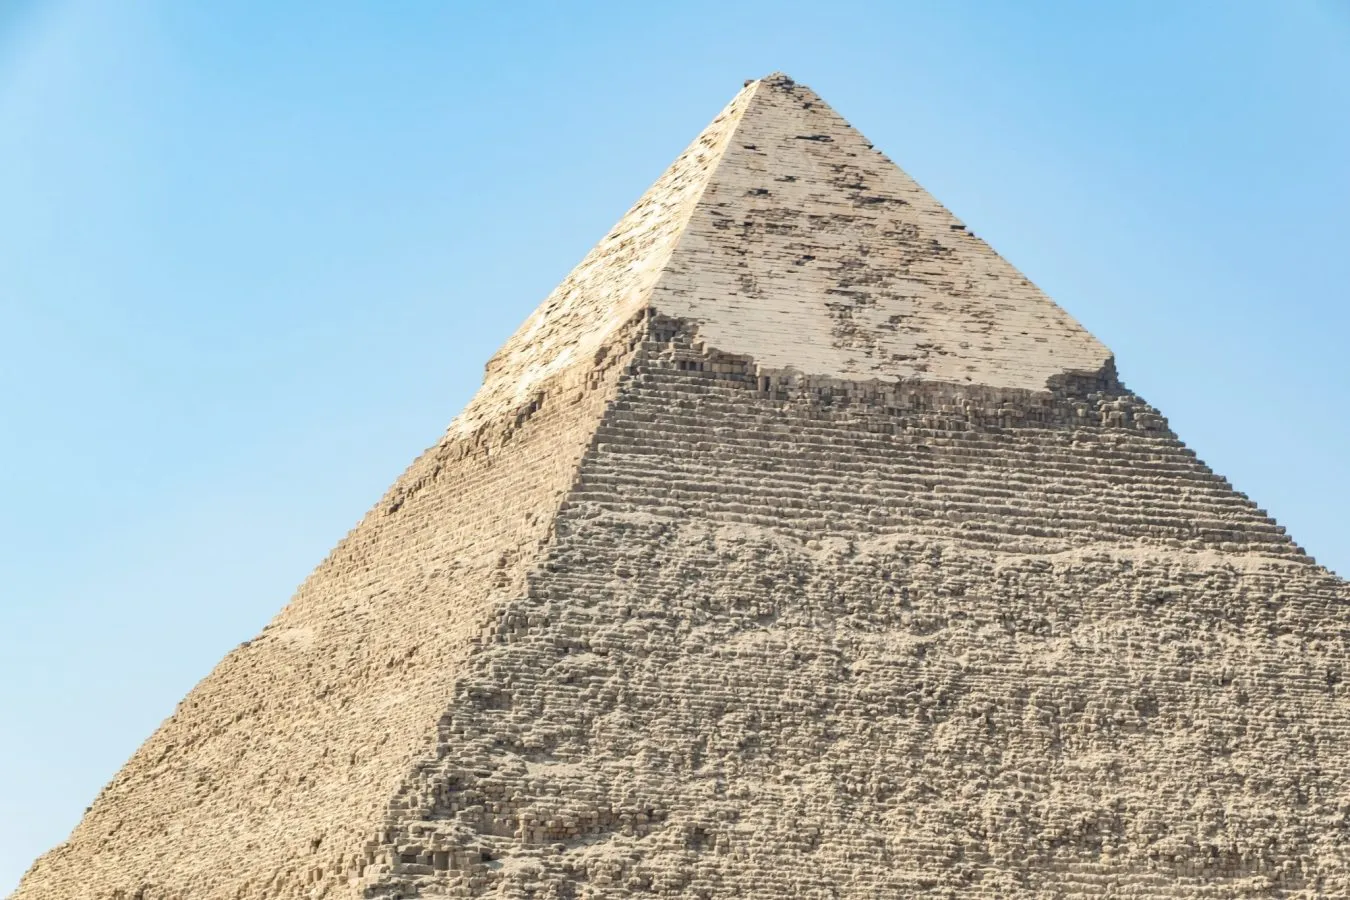 pyramid of giza top as seen during a one day layover in cairo egypt